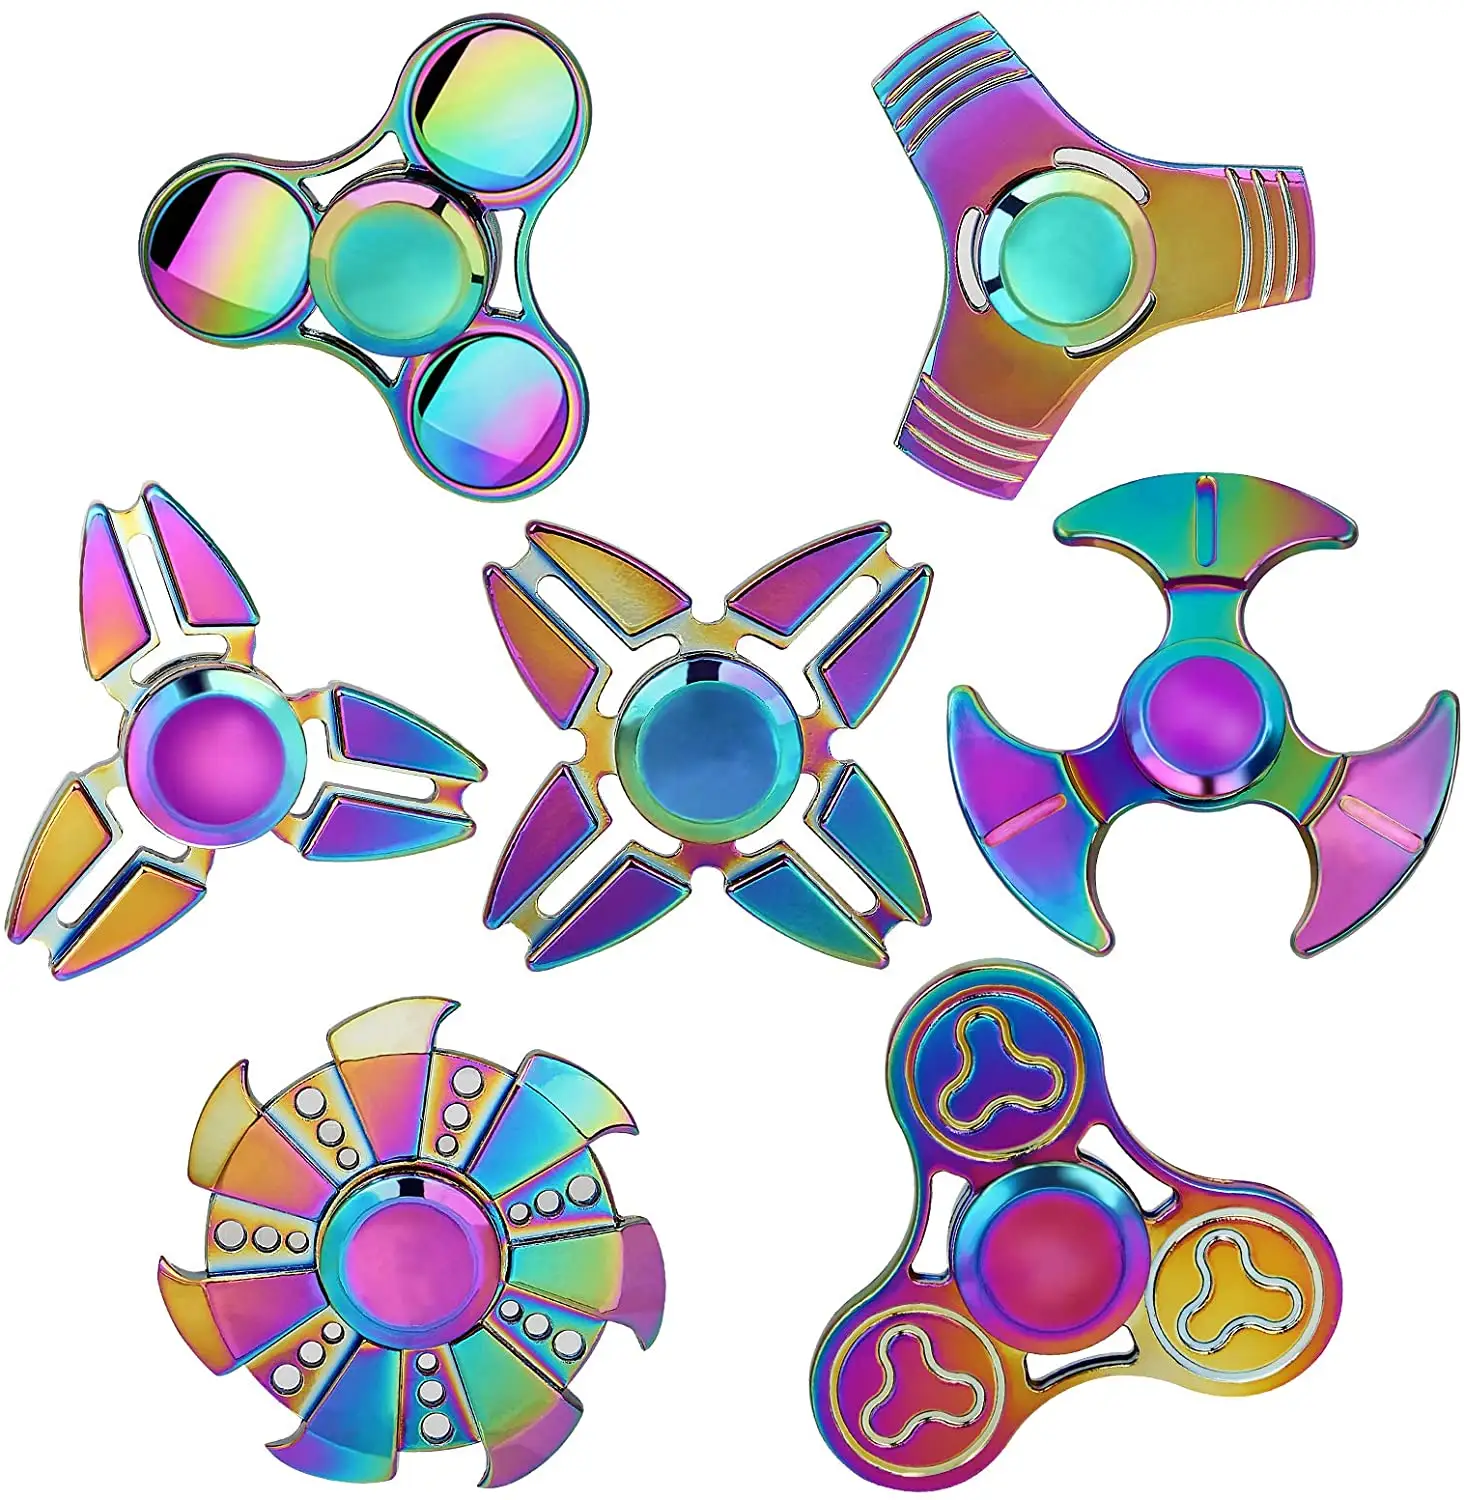 100 designs Stainless Steel Bearing 3-5 Min High Speed Stress Relief Metal Fidget Spinner for Adult Kid Autism